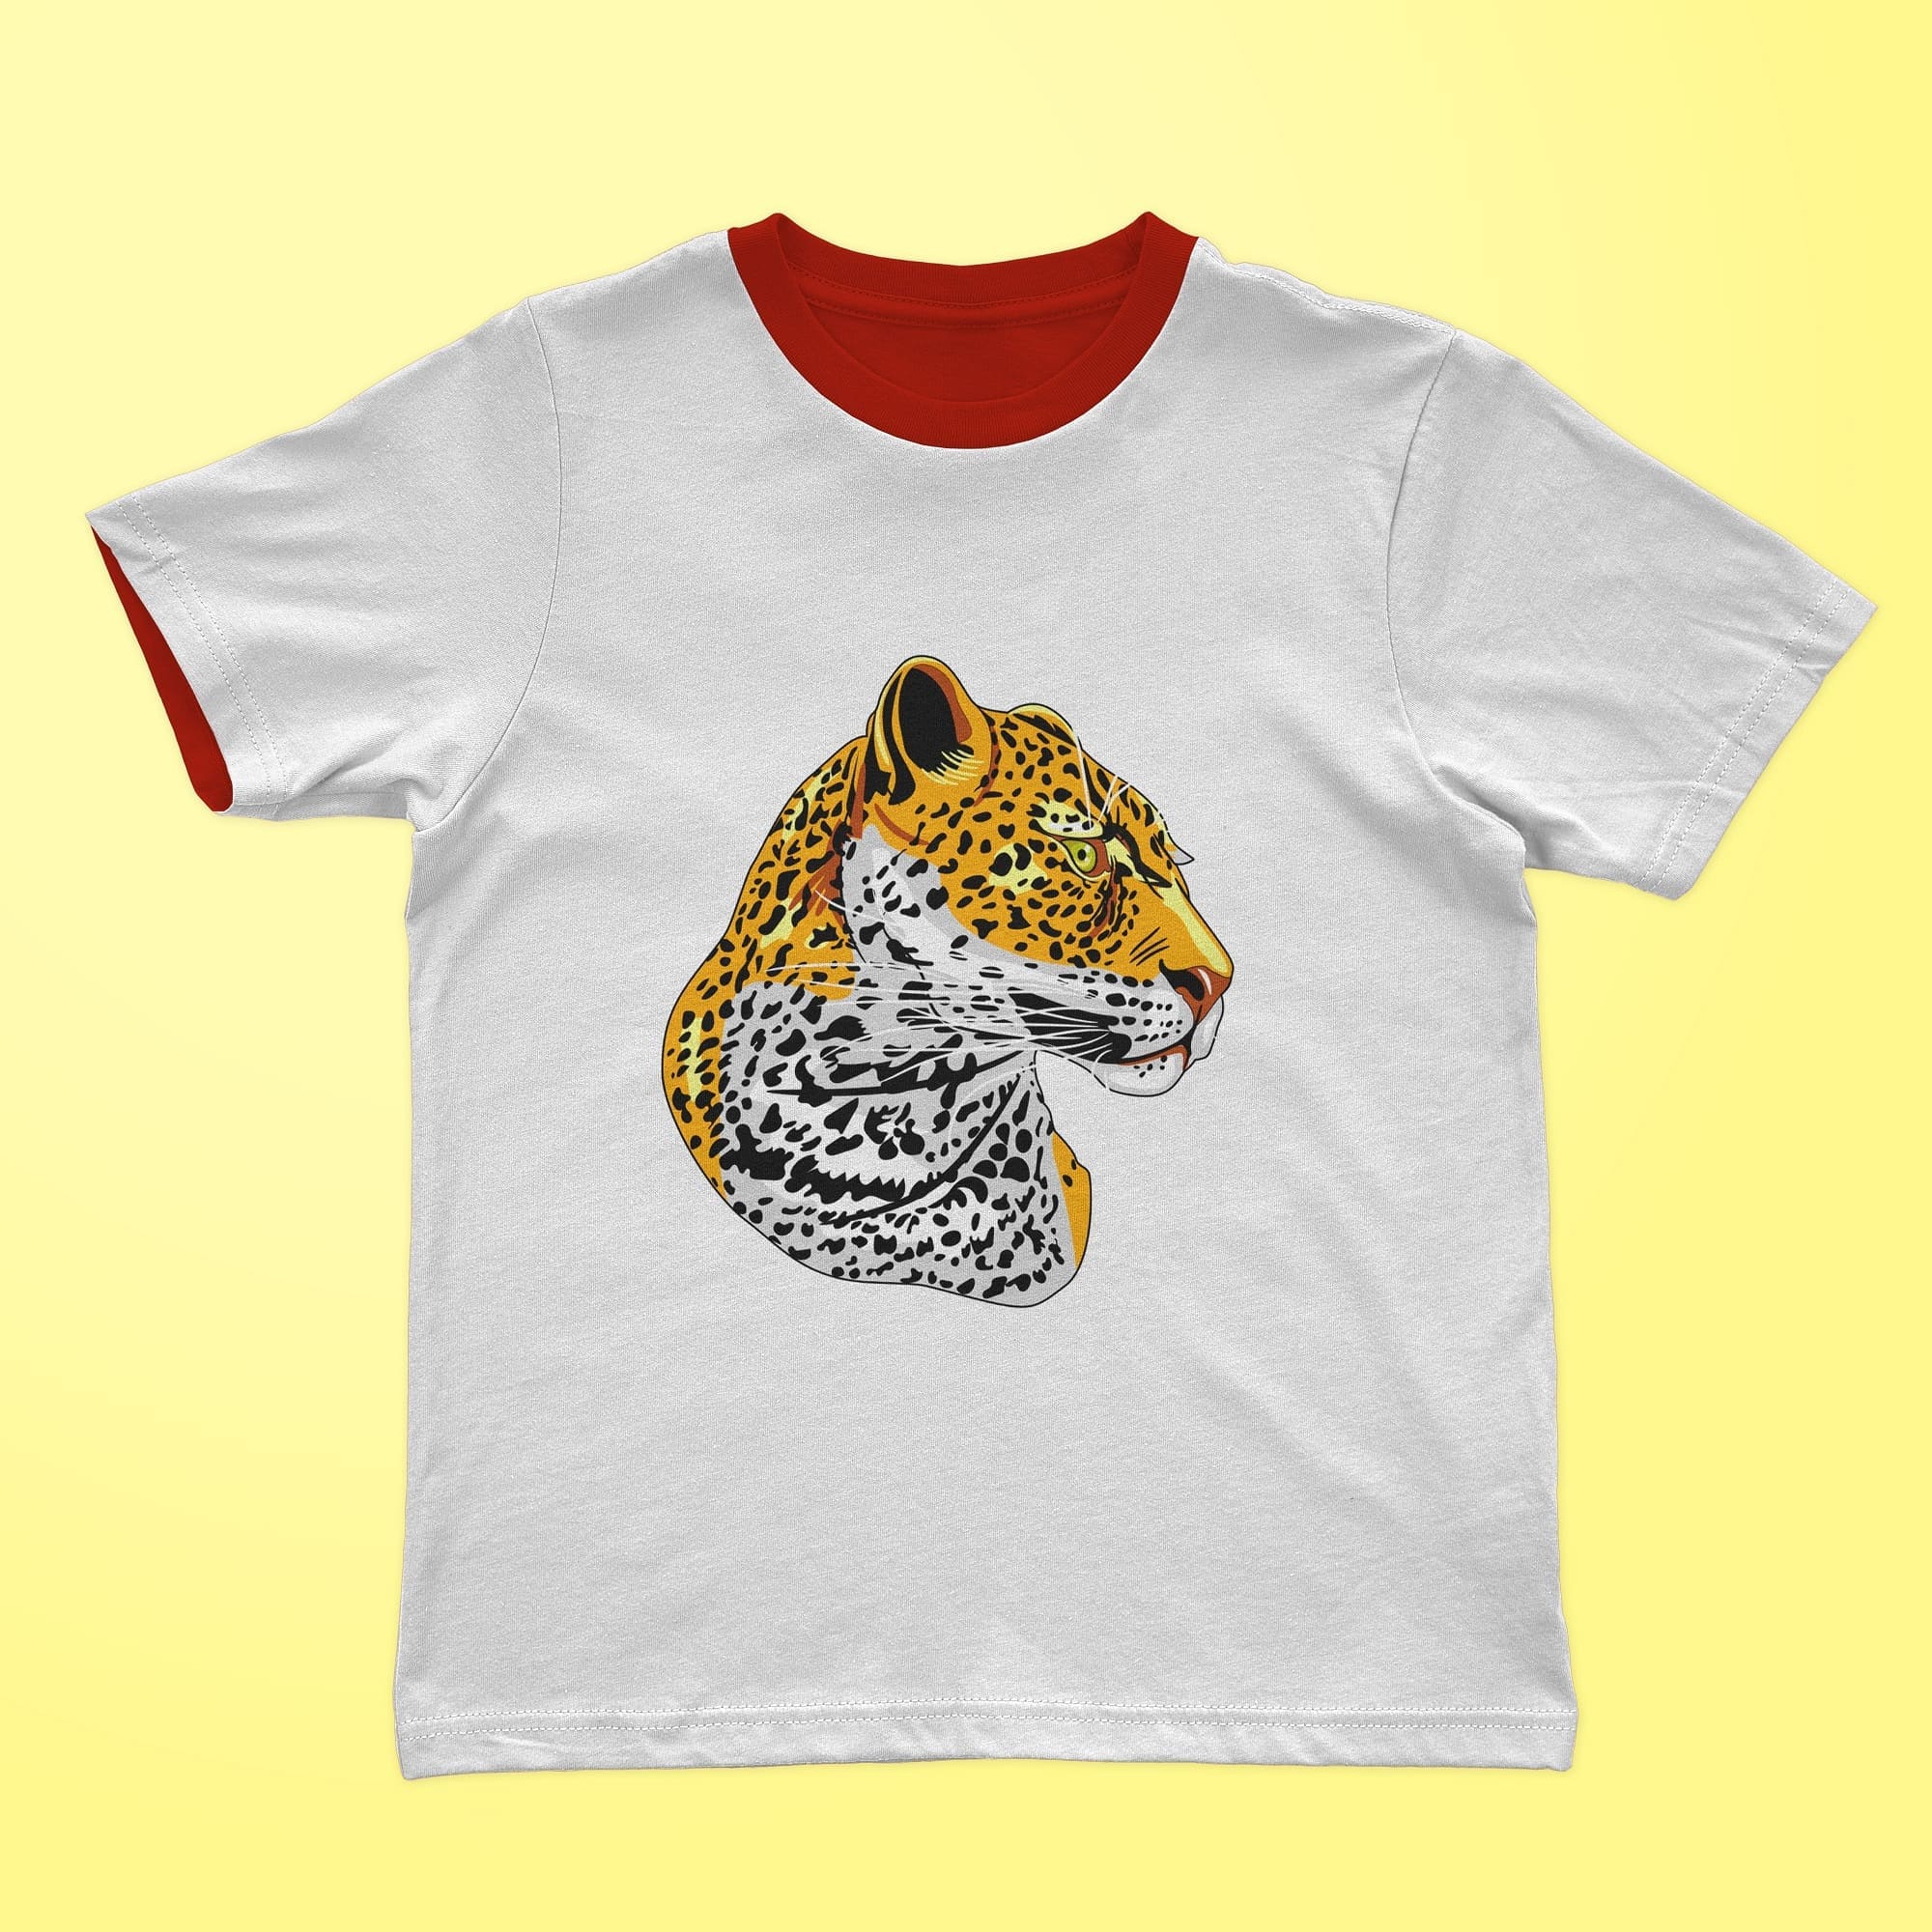 A cool white t-shirt with a leopard head print.